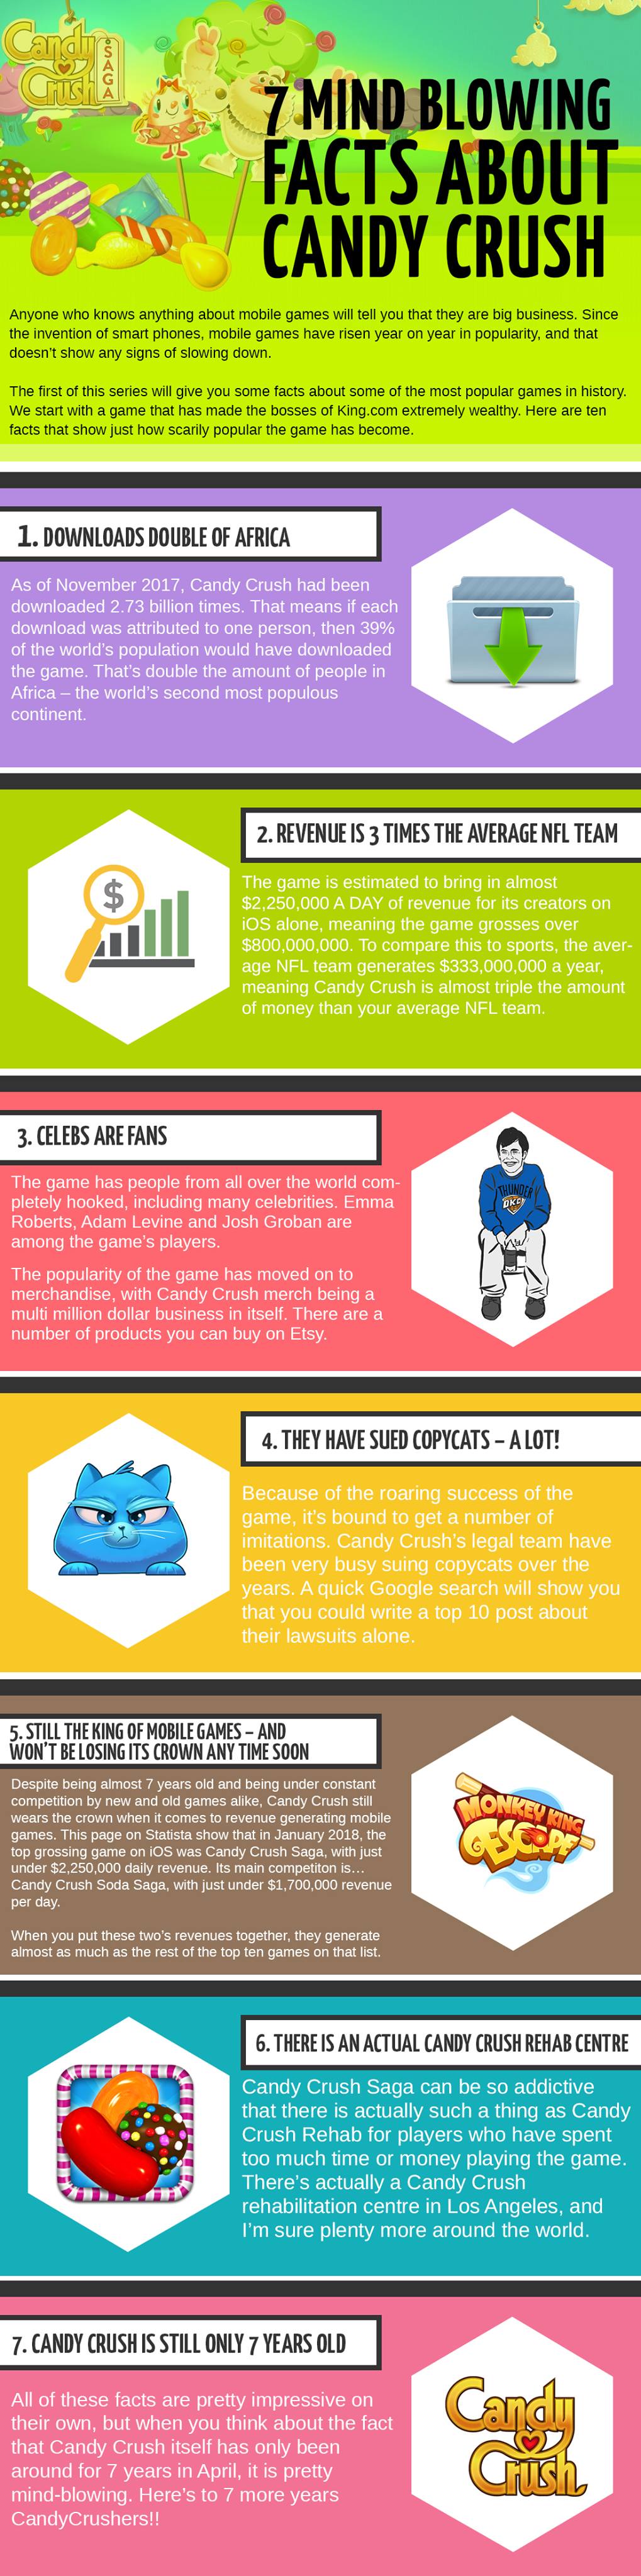 infographic about candy crush facts